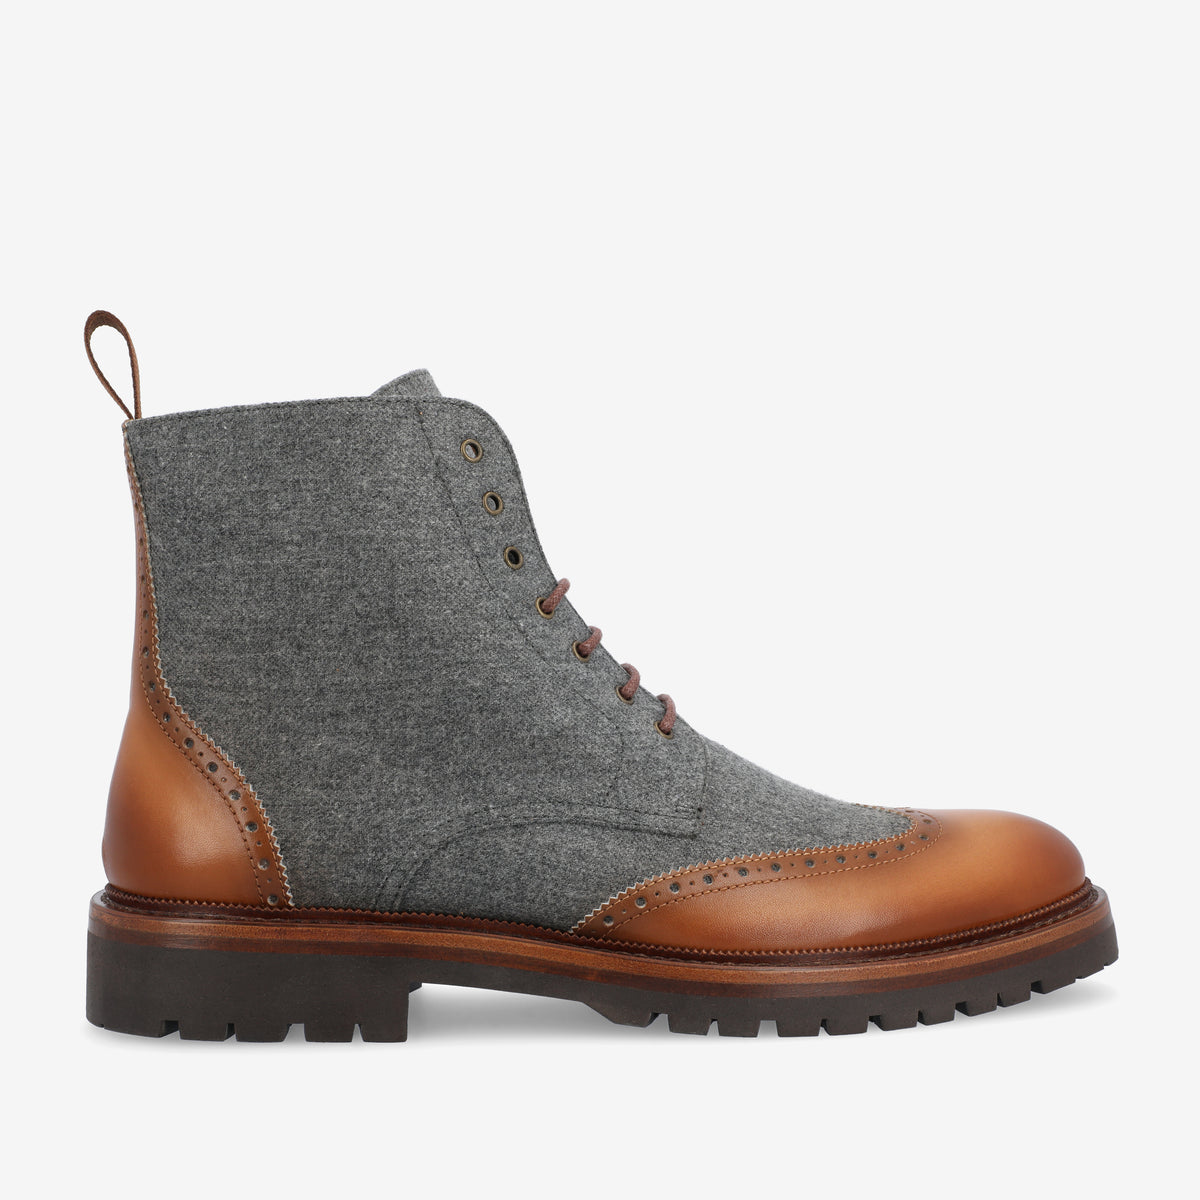 The Livingston Boot in Grey/Brown